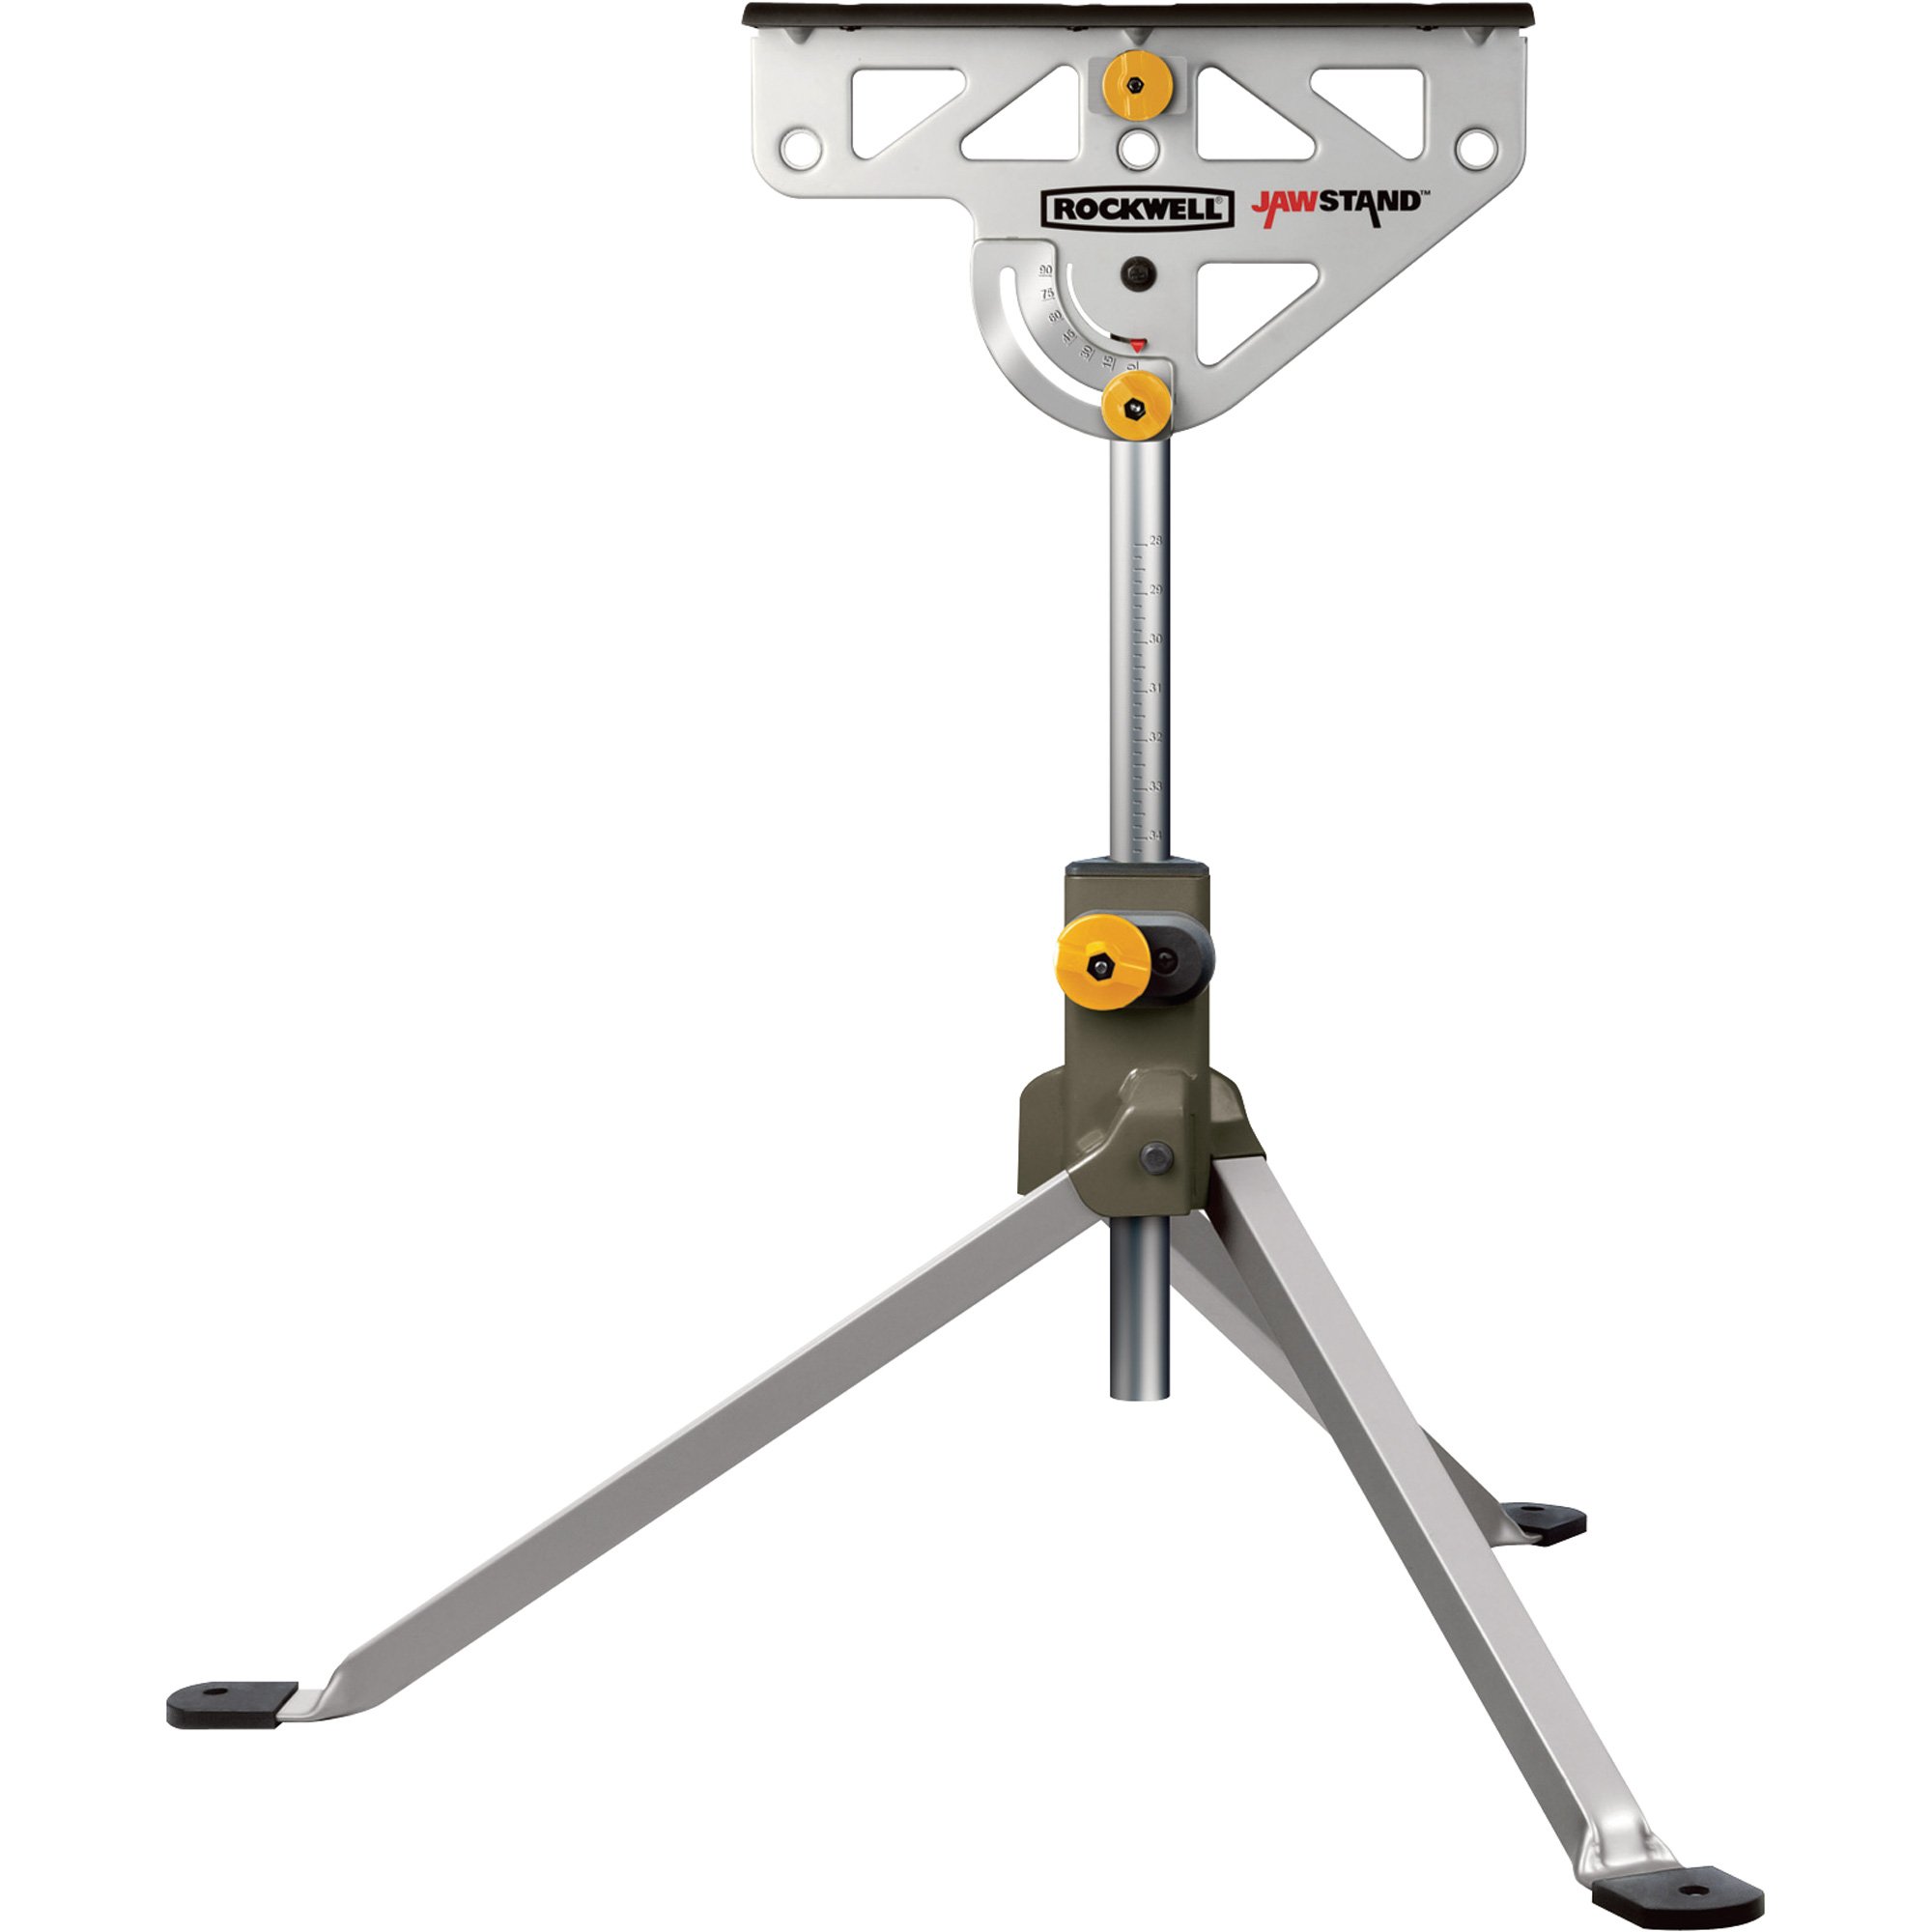 Rockwell JawStand Work Support Stand, Model# RK9033 Northern Tool